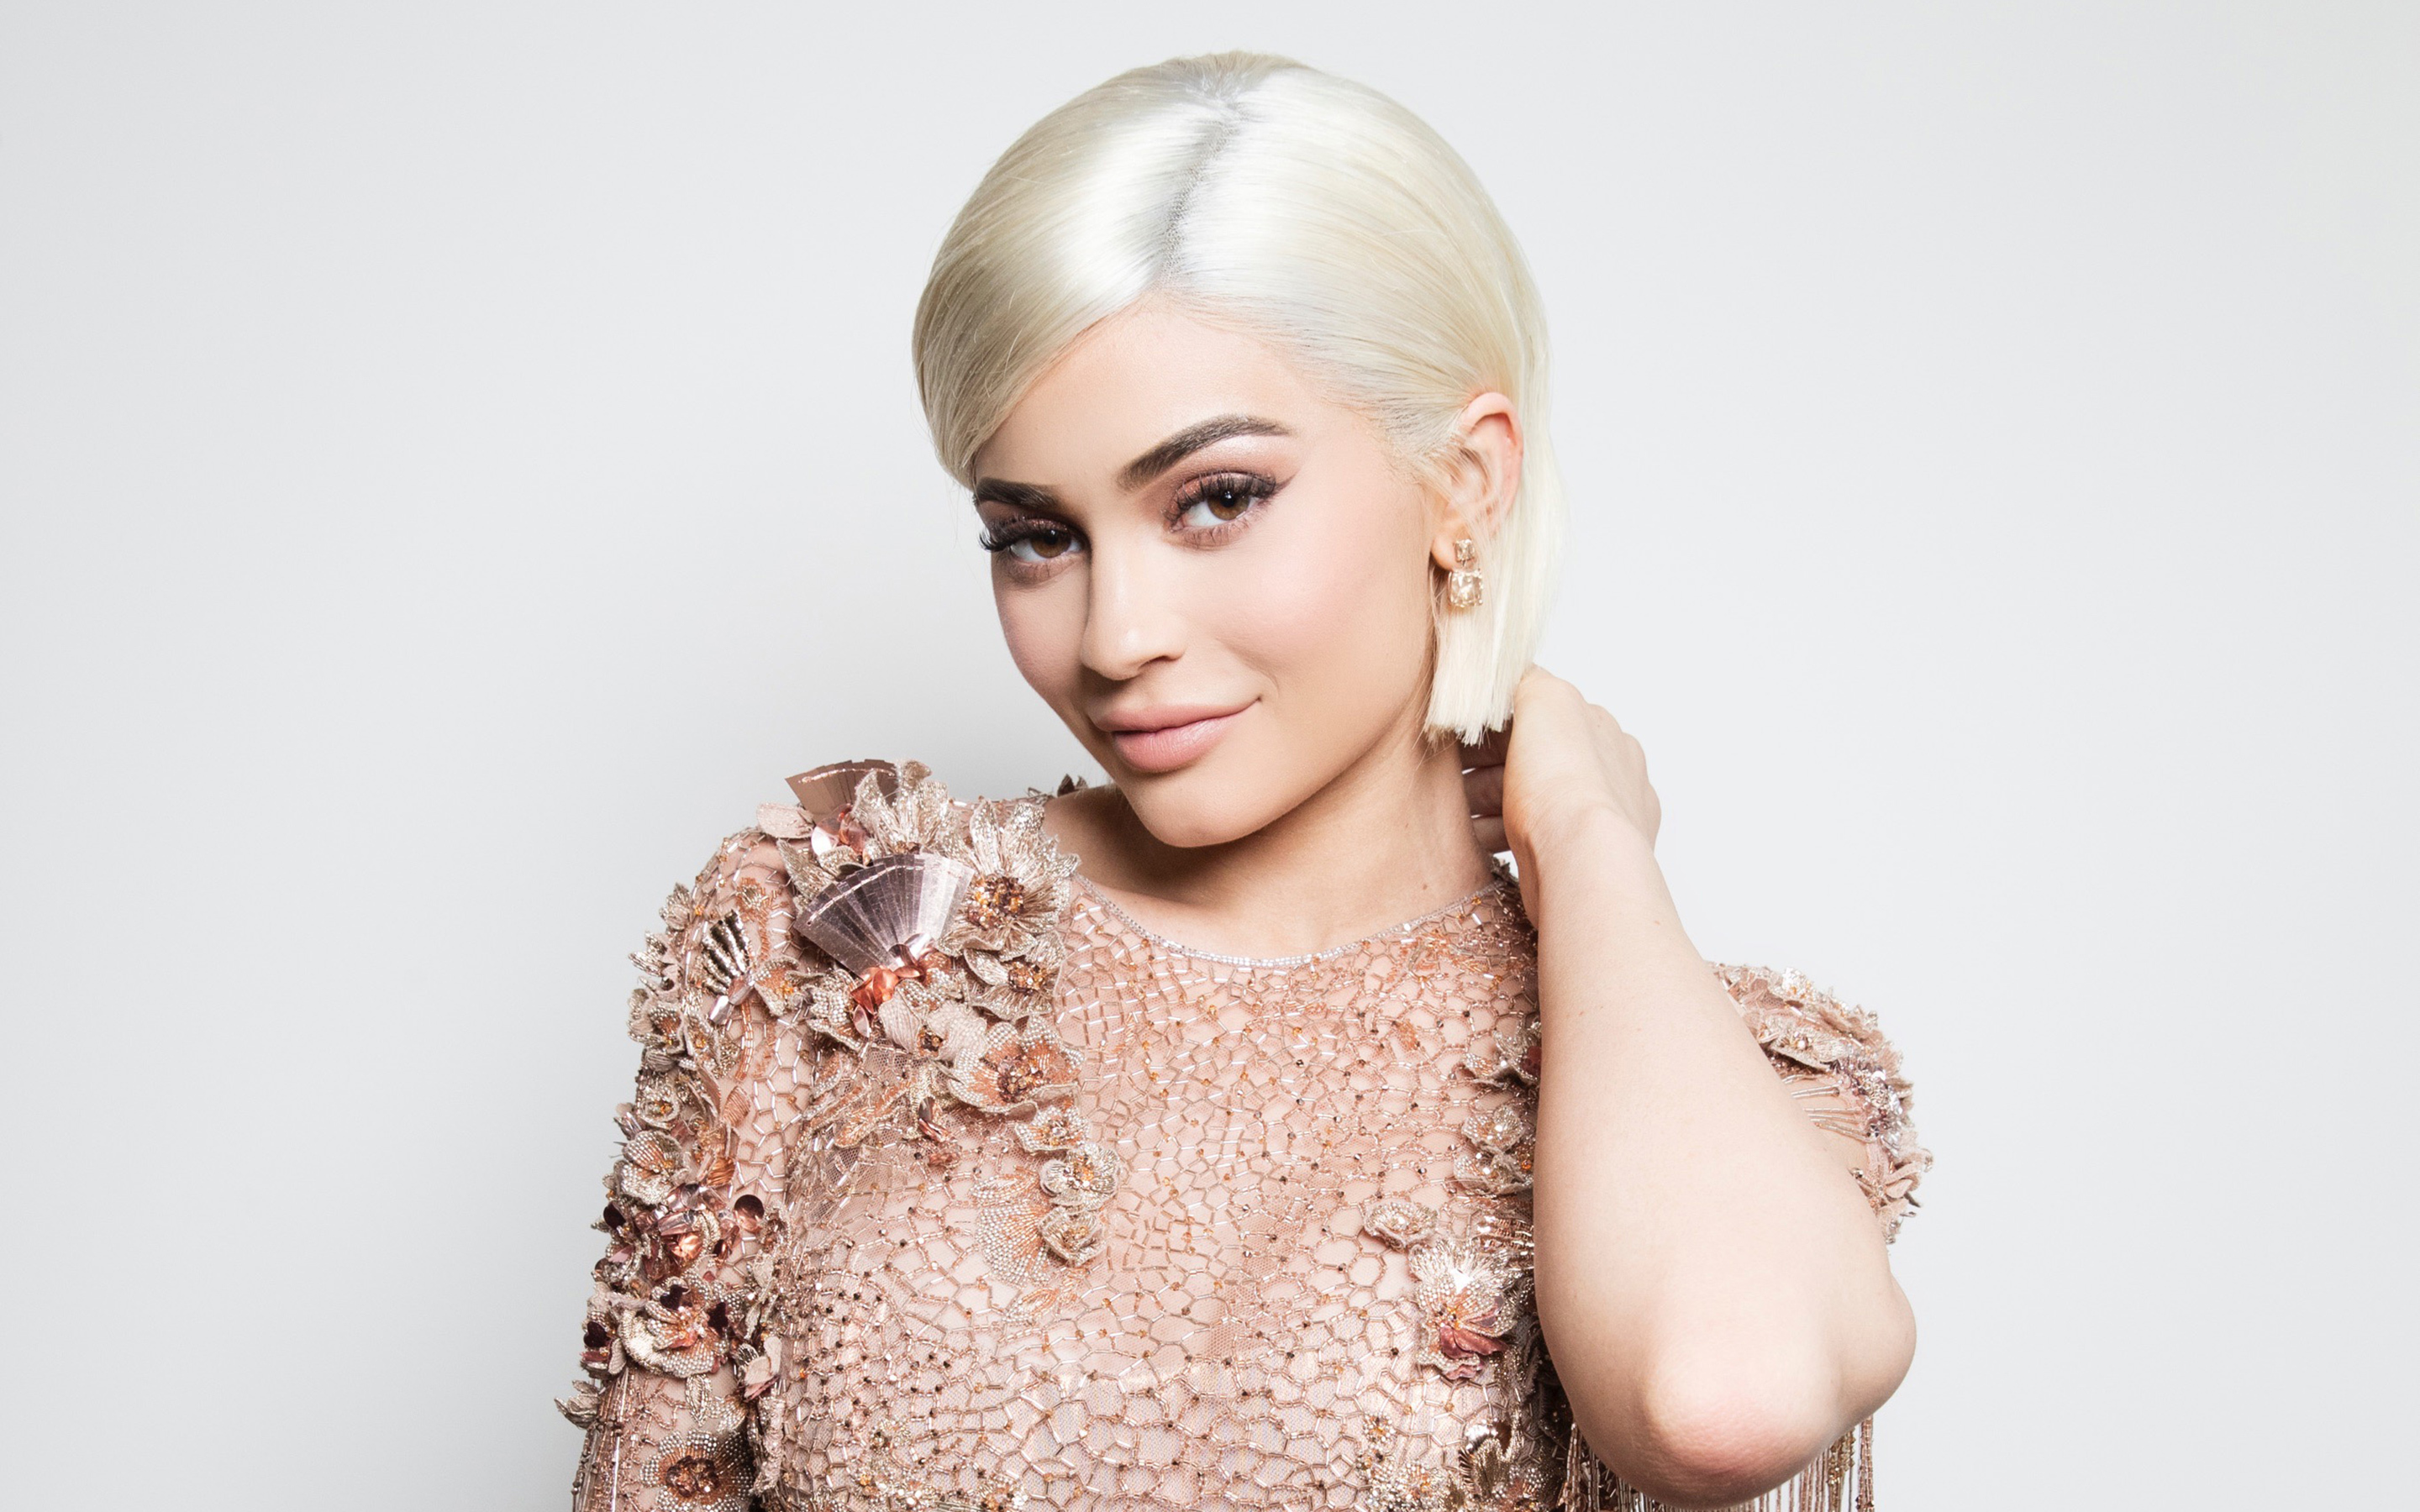 Blonde Kylie Jenner 2018 Wallpaper Hd Celebrities 4k Wallpapers Images And Background